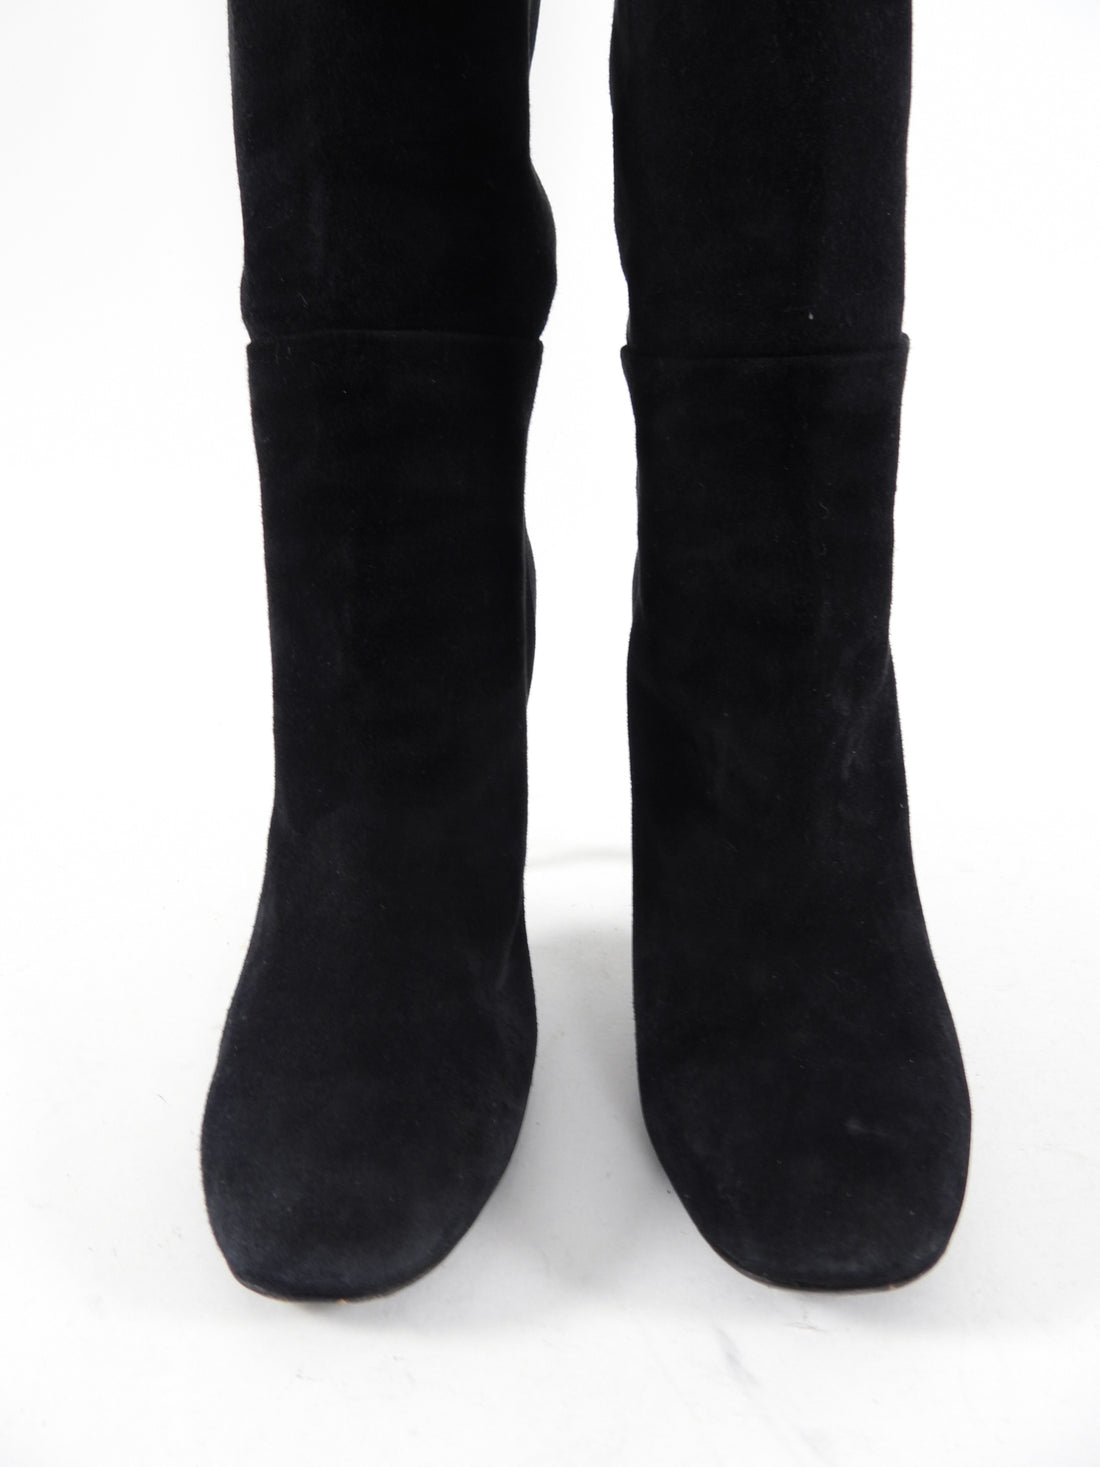 Tom Ford Black Suede Tall Boot - 6